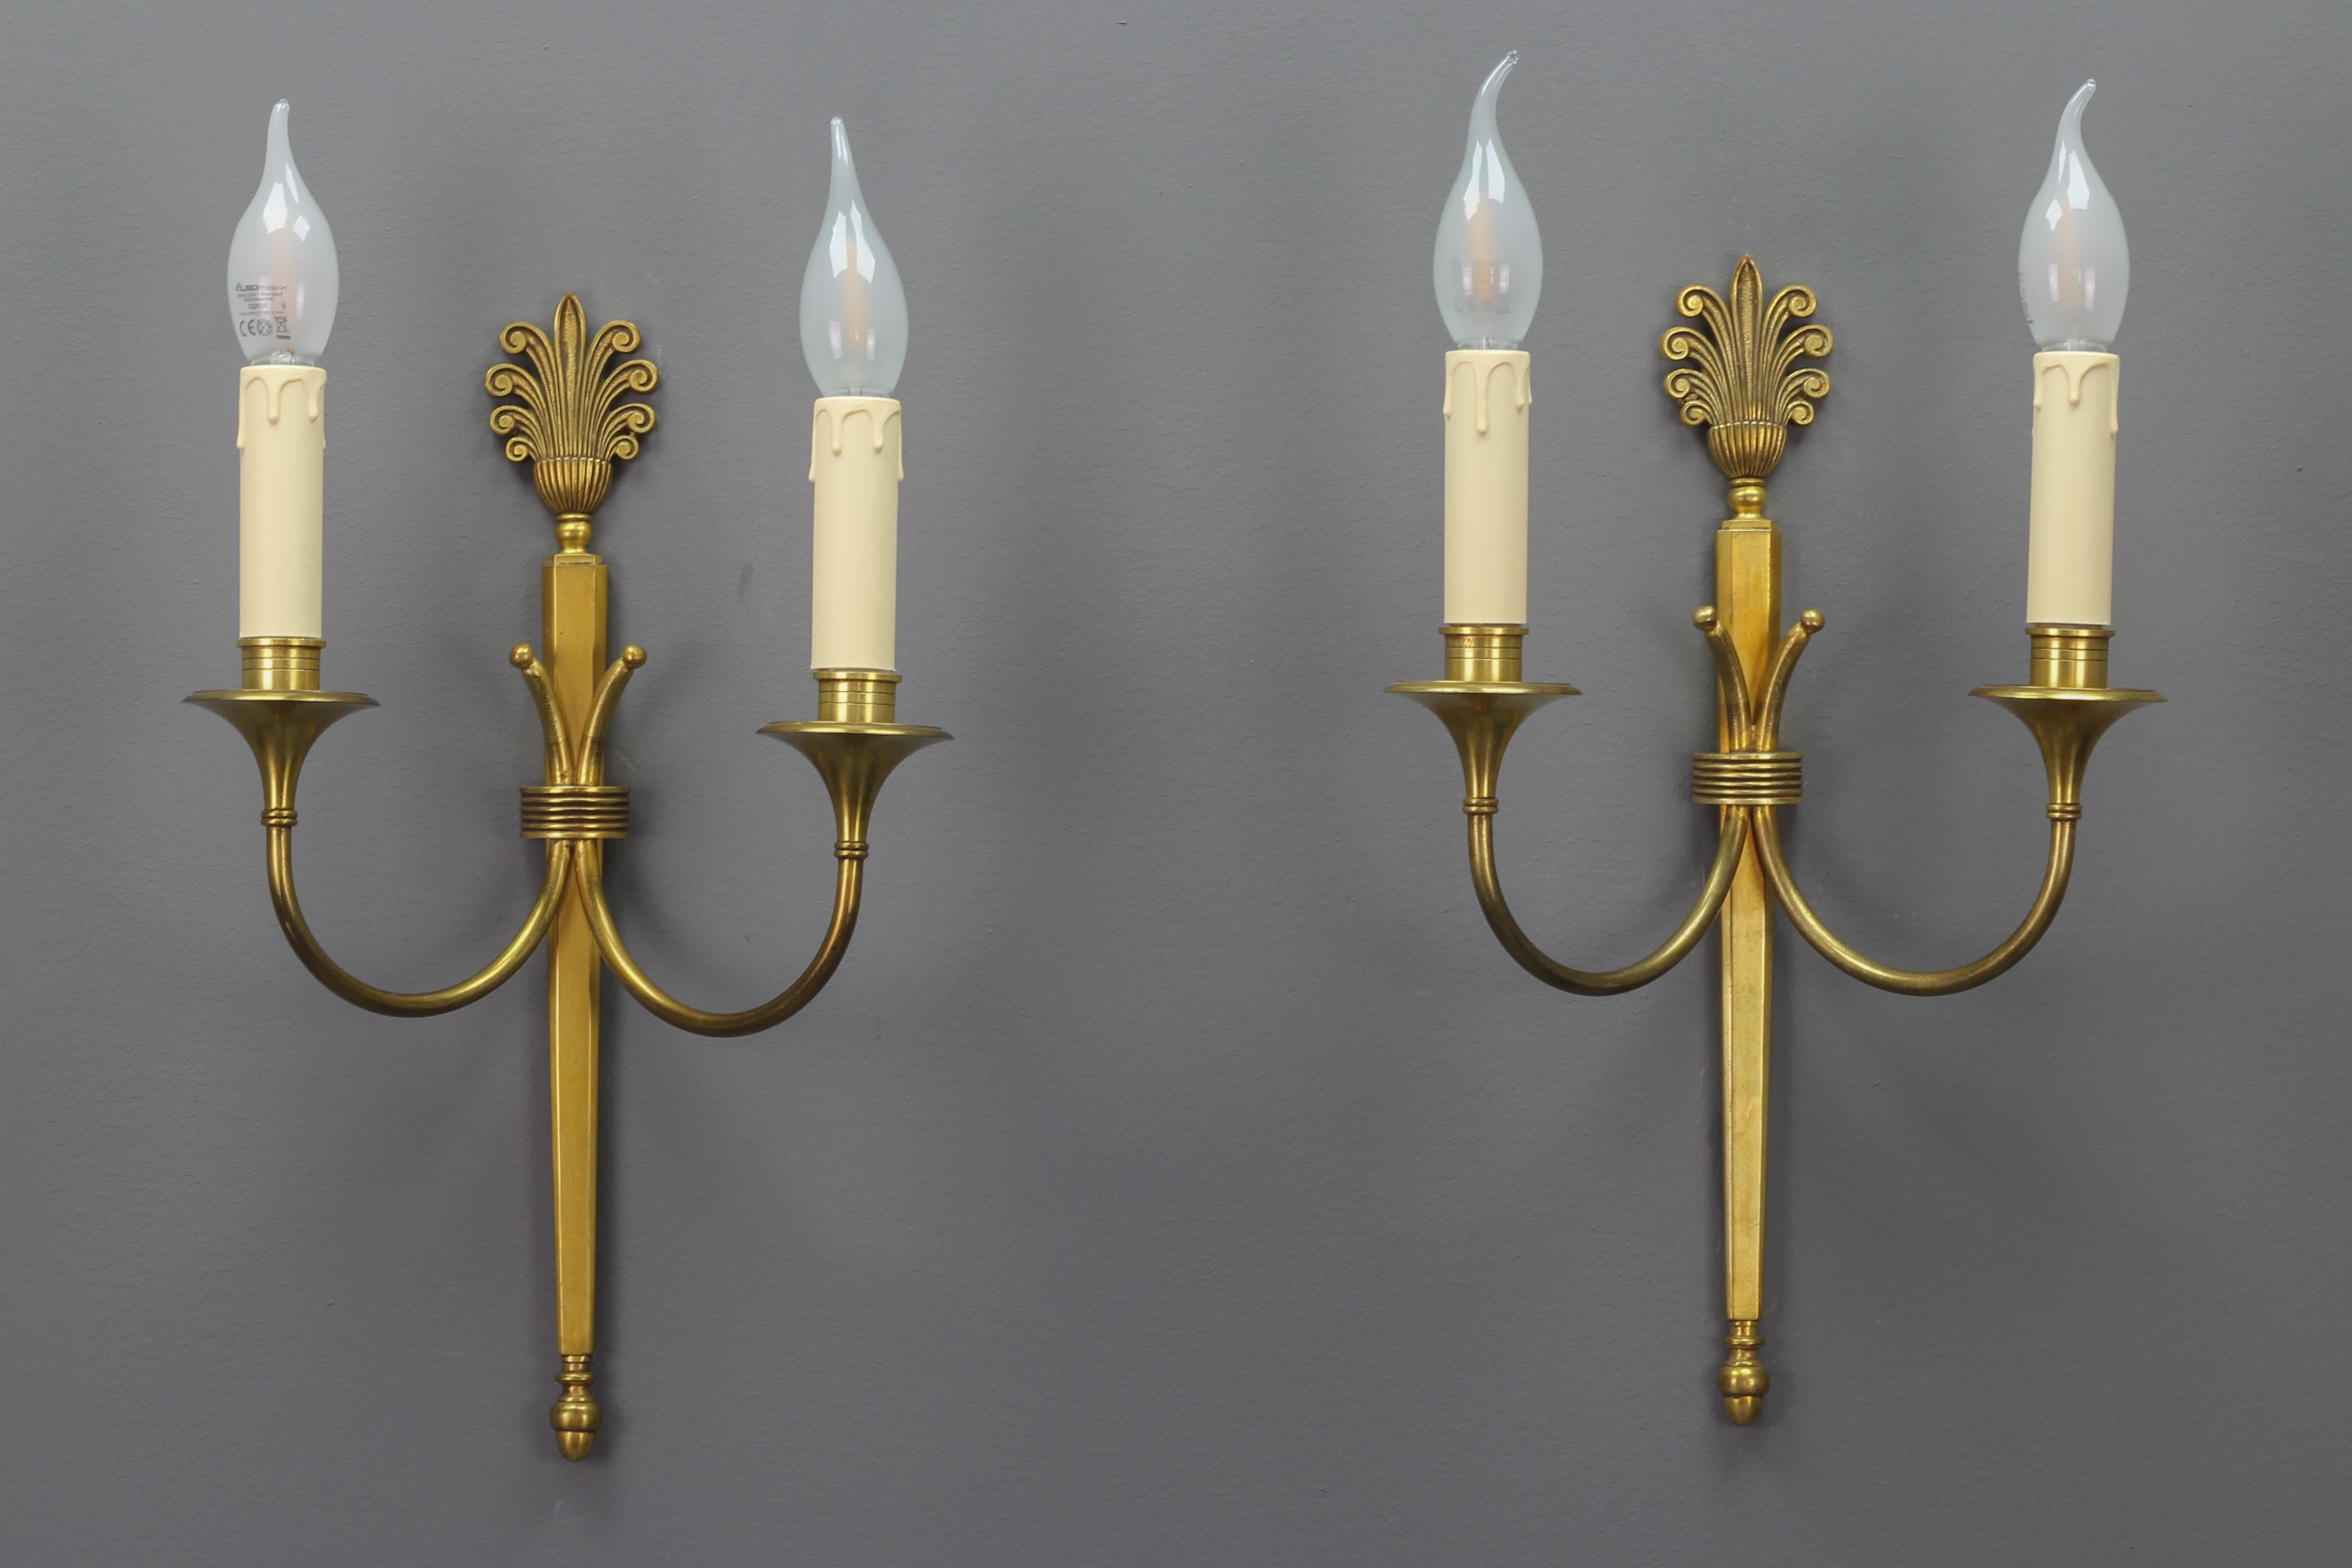 Pair of French Art Deco brass twin arm sconces from ca. 1930.
This elegant pair of brass sconces has a beautiful brass base with typical Art Deco-style decors. Each sconce has two arms each with a socket for E14 size light bulb. Numbered at the